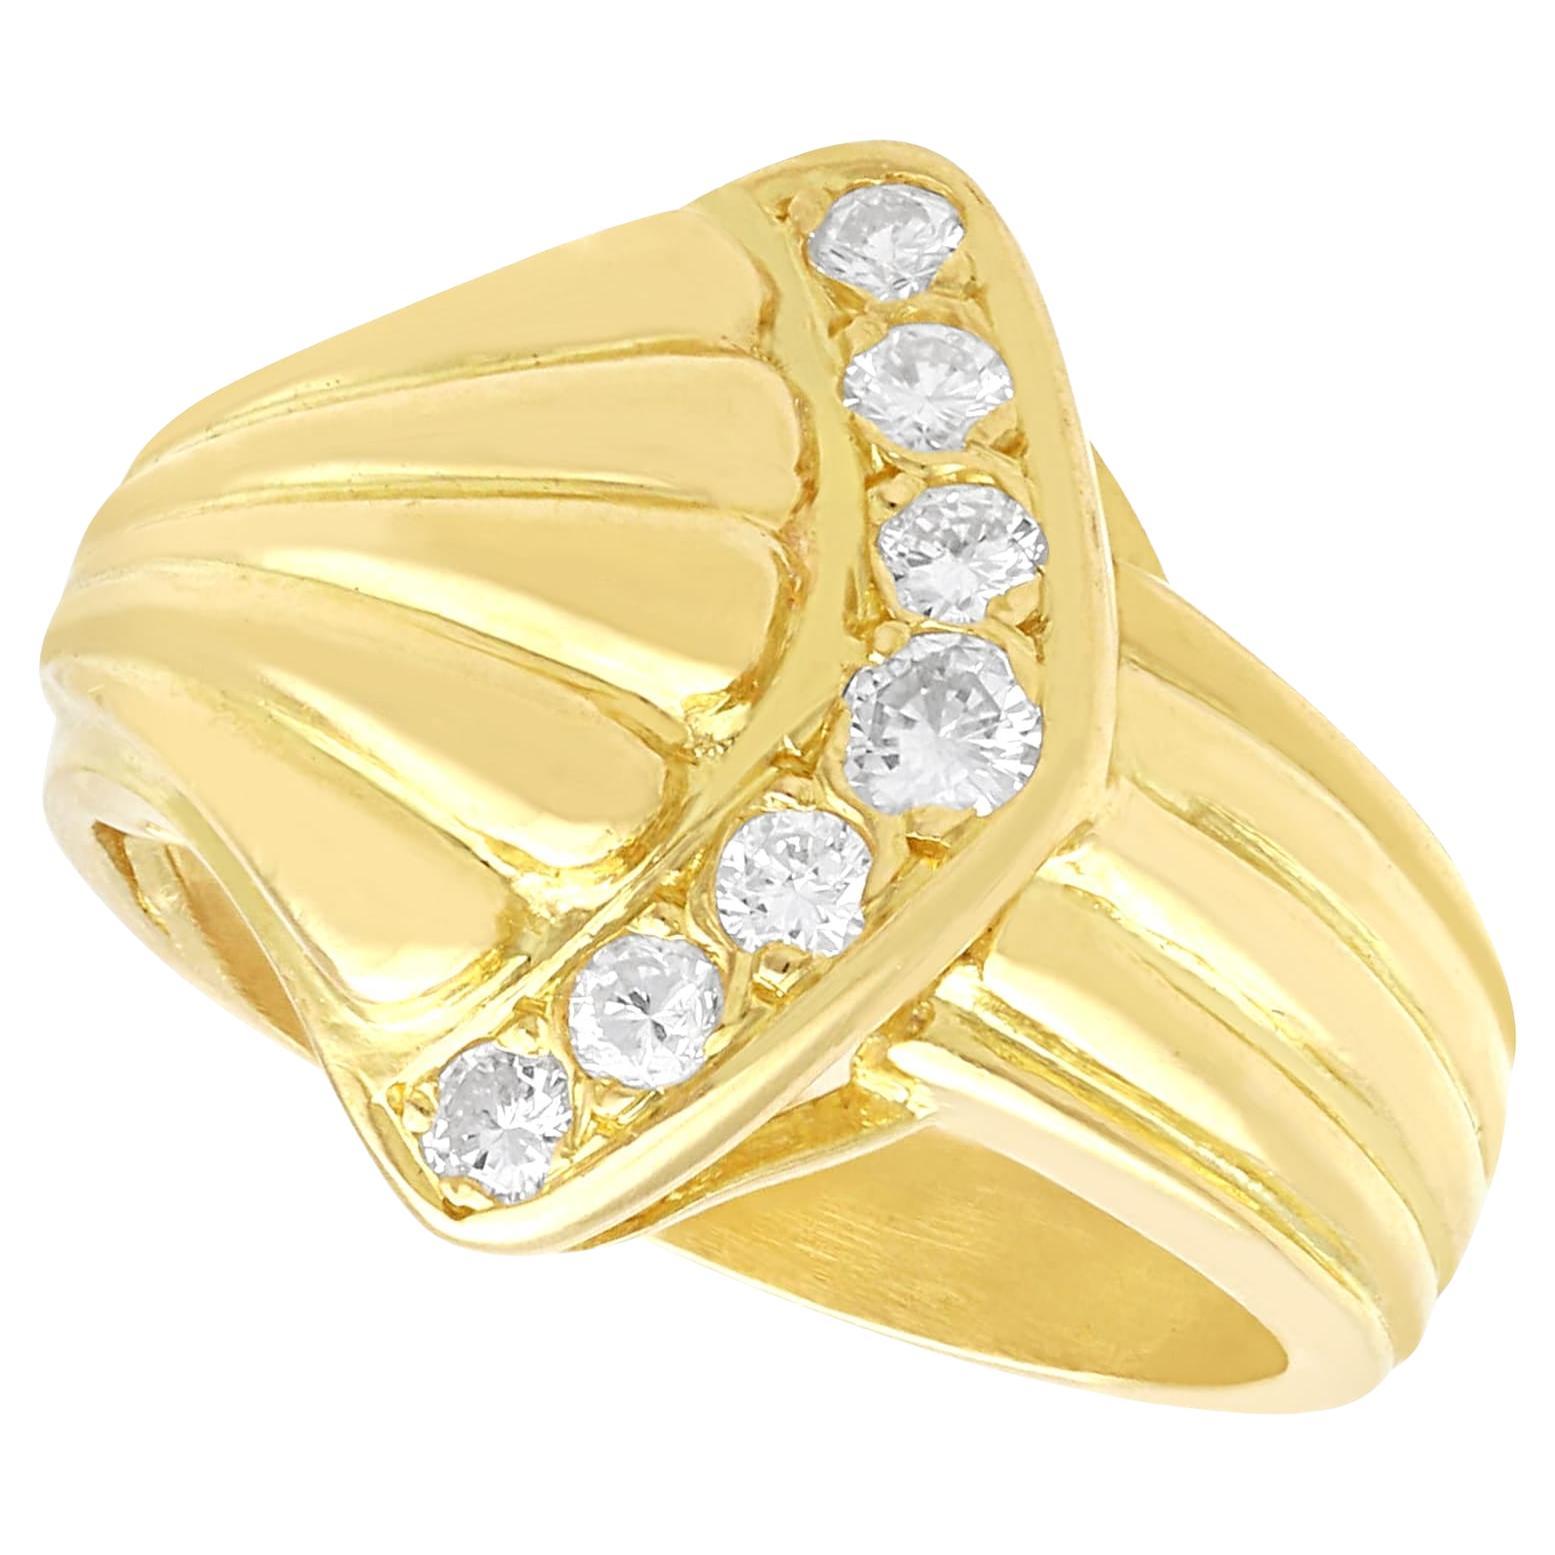 1950s Vintage 0.18 Carat Diamond and 18k Yellow Gold Dress Ring For Sale